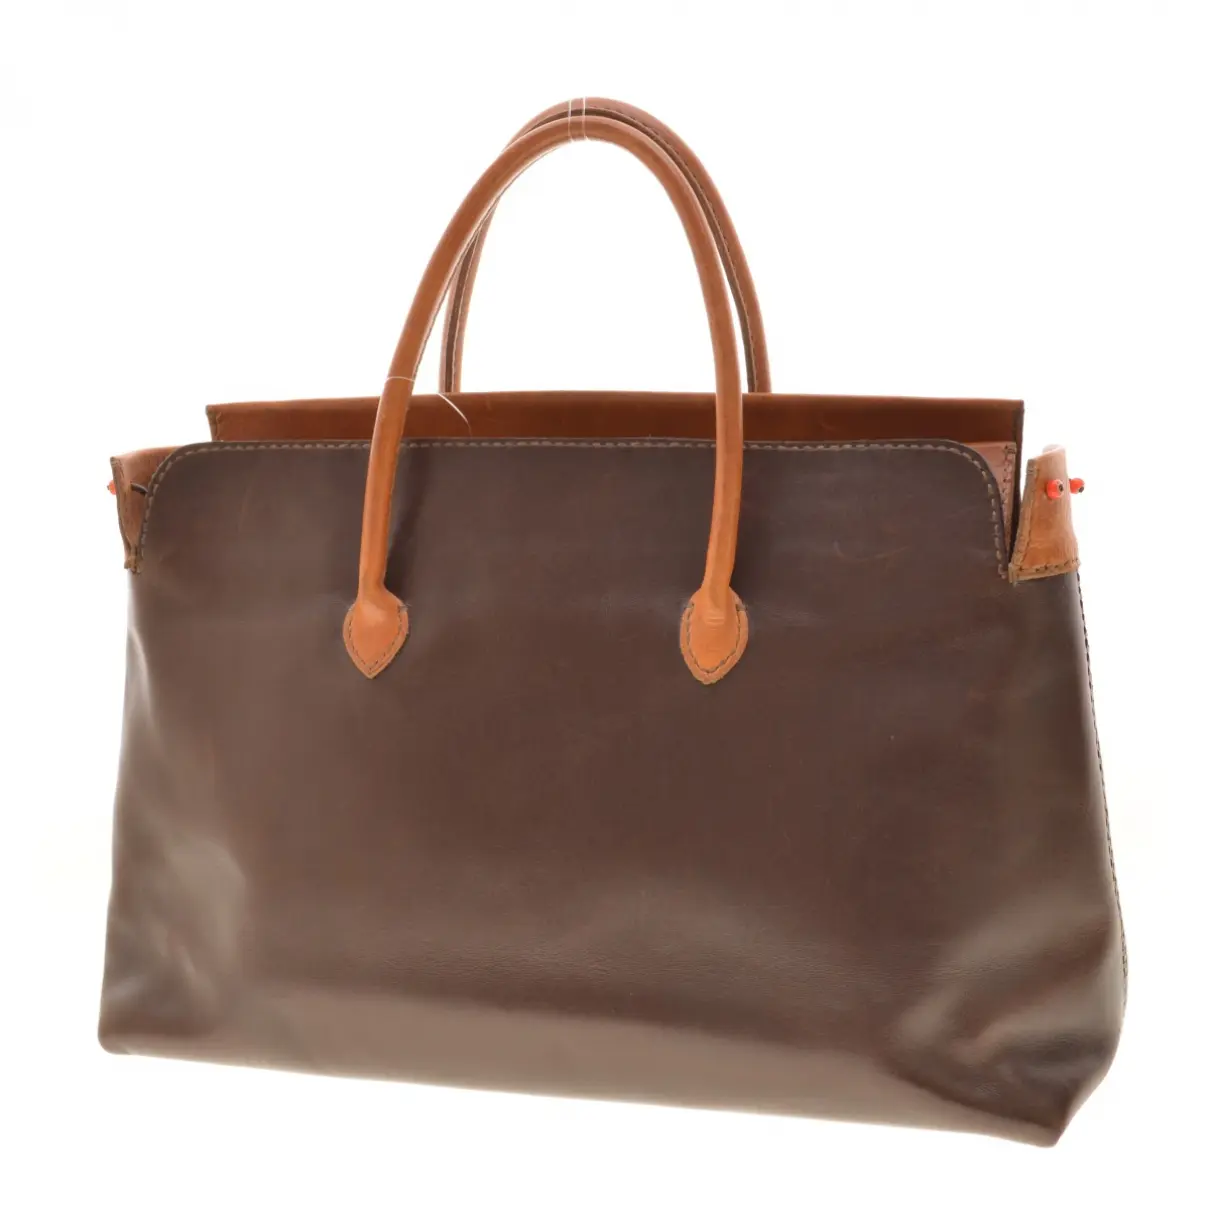 Buy Henry Leather tote online